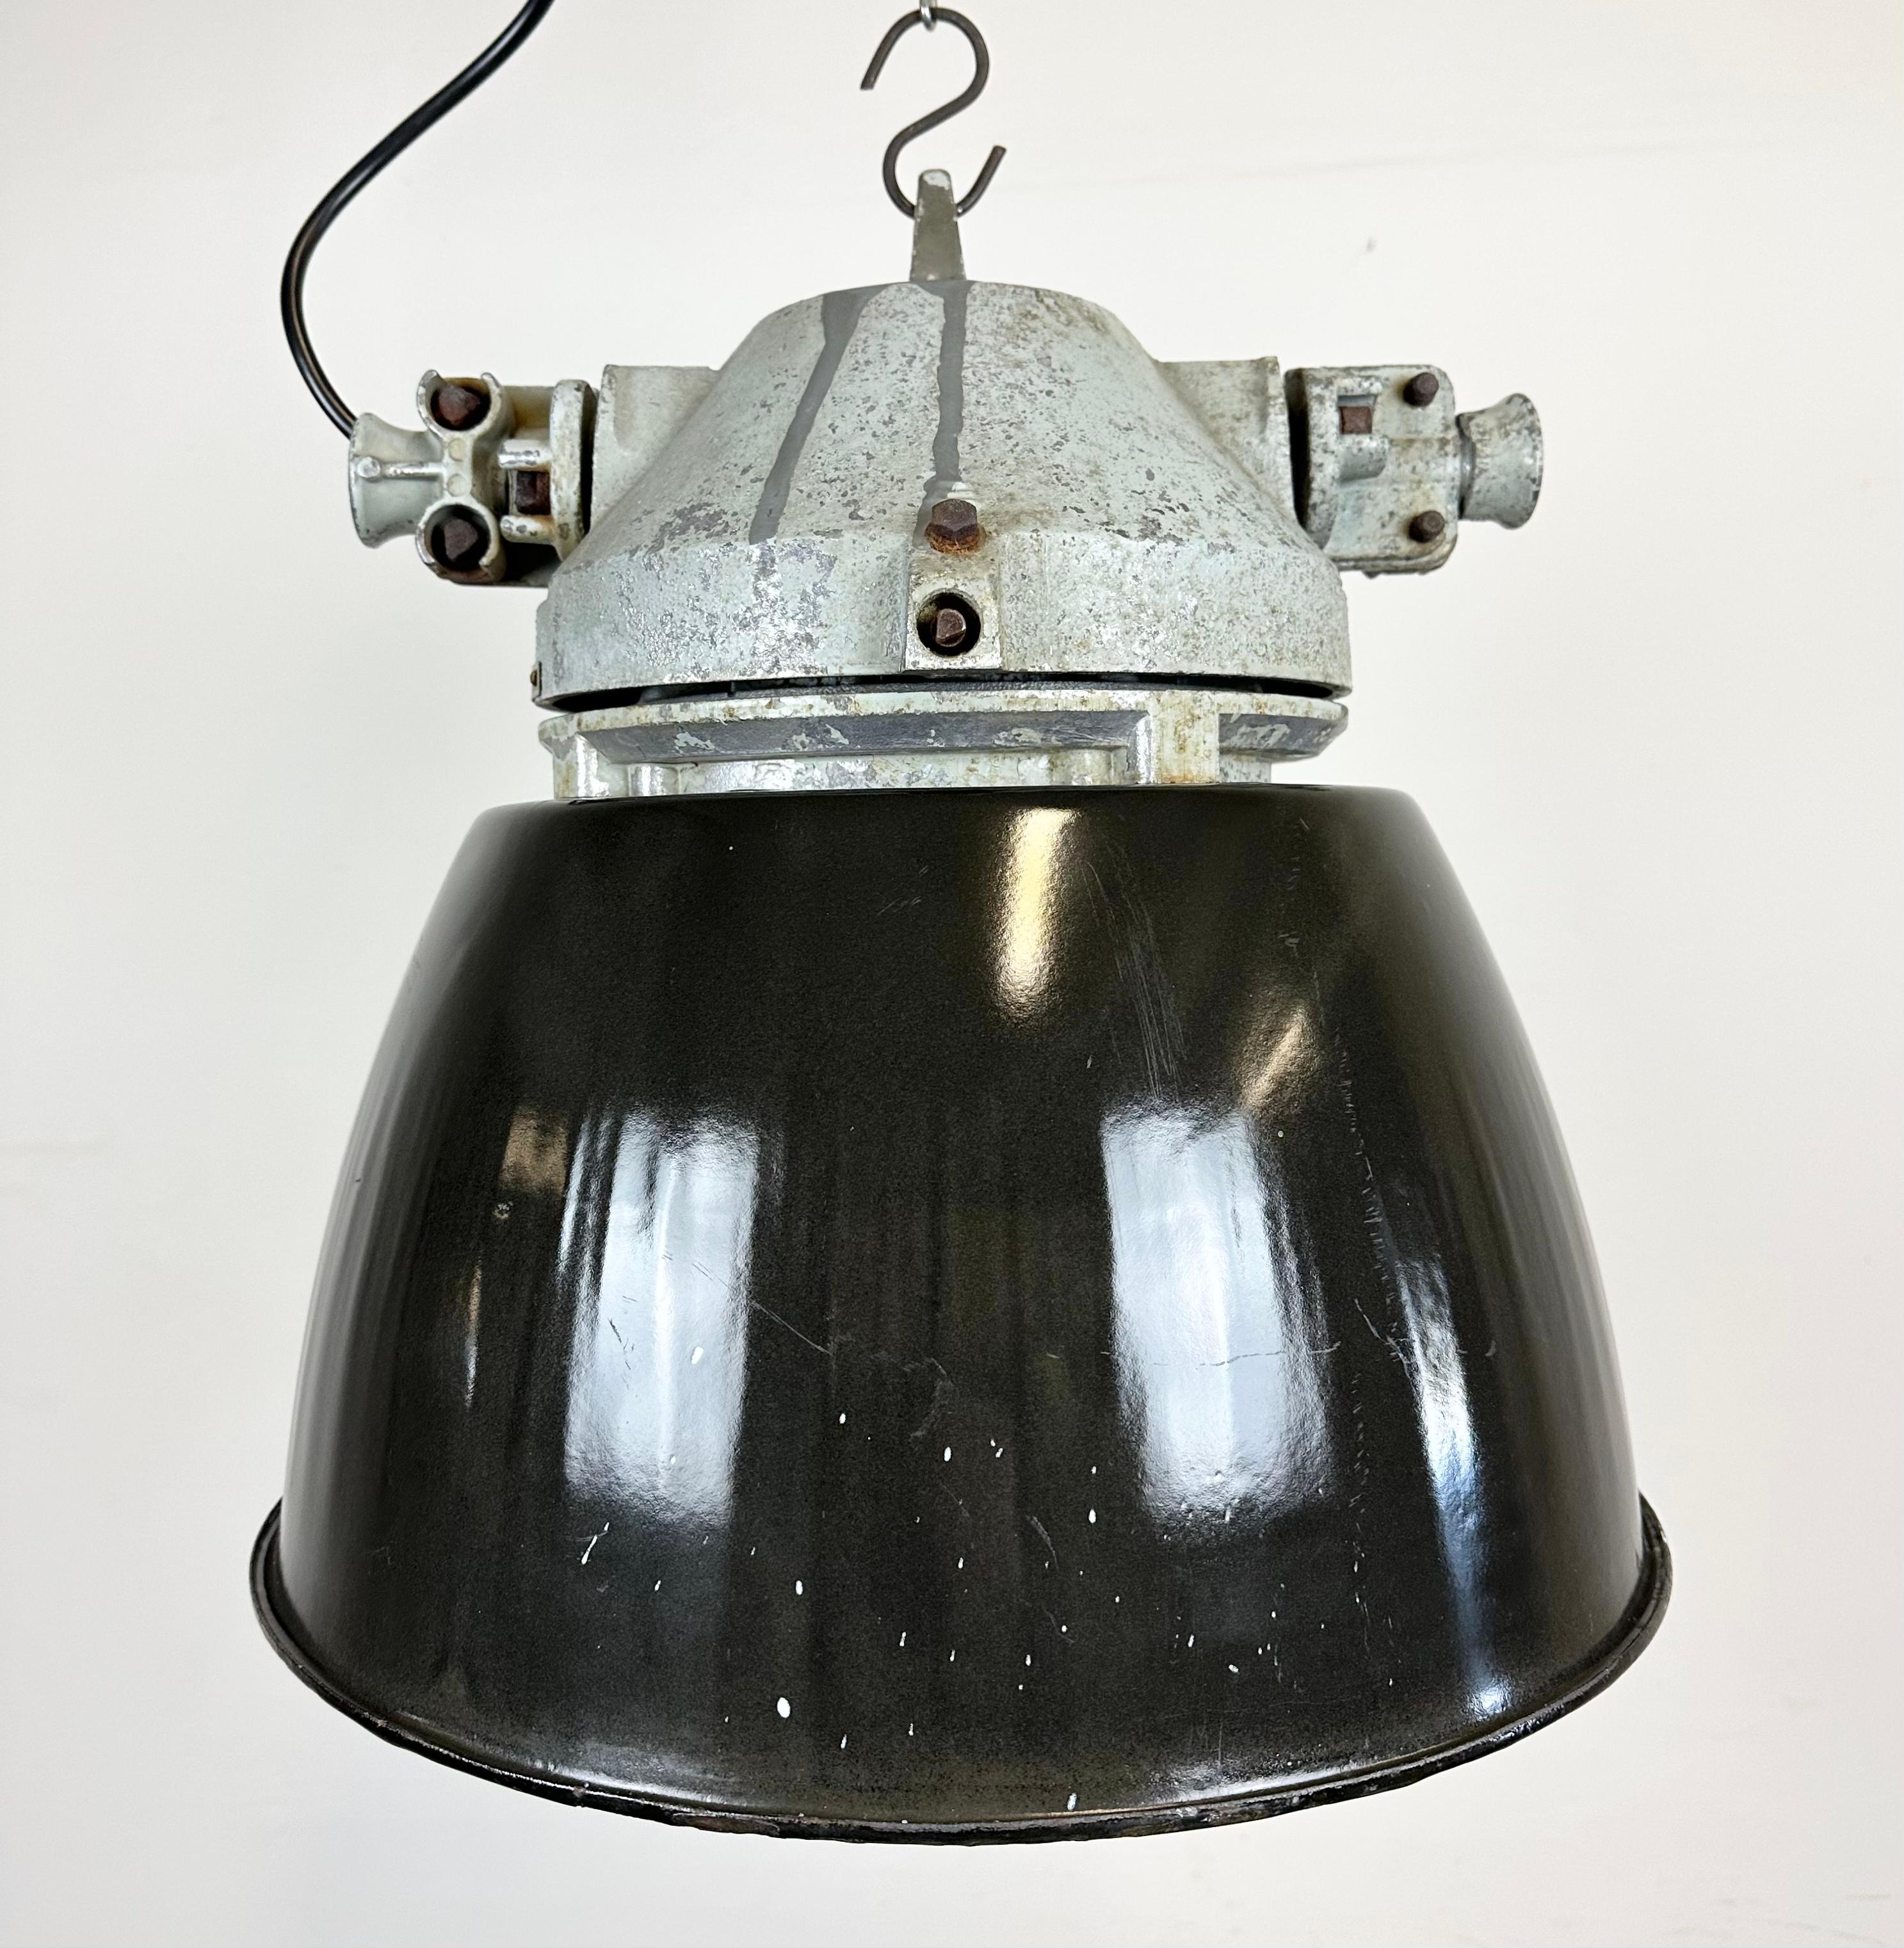 Grey industrial light with massive protective glass bulb. Cast aluminium body, clear glass. Black enameled shade with white interior. The socket requires E27/ E26 light bulbs. Newly wired. Weight: 9 kg.